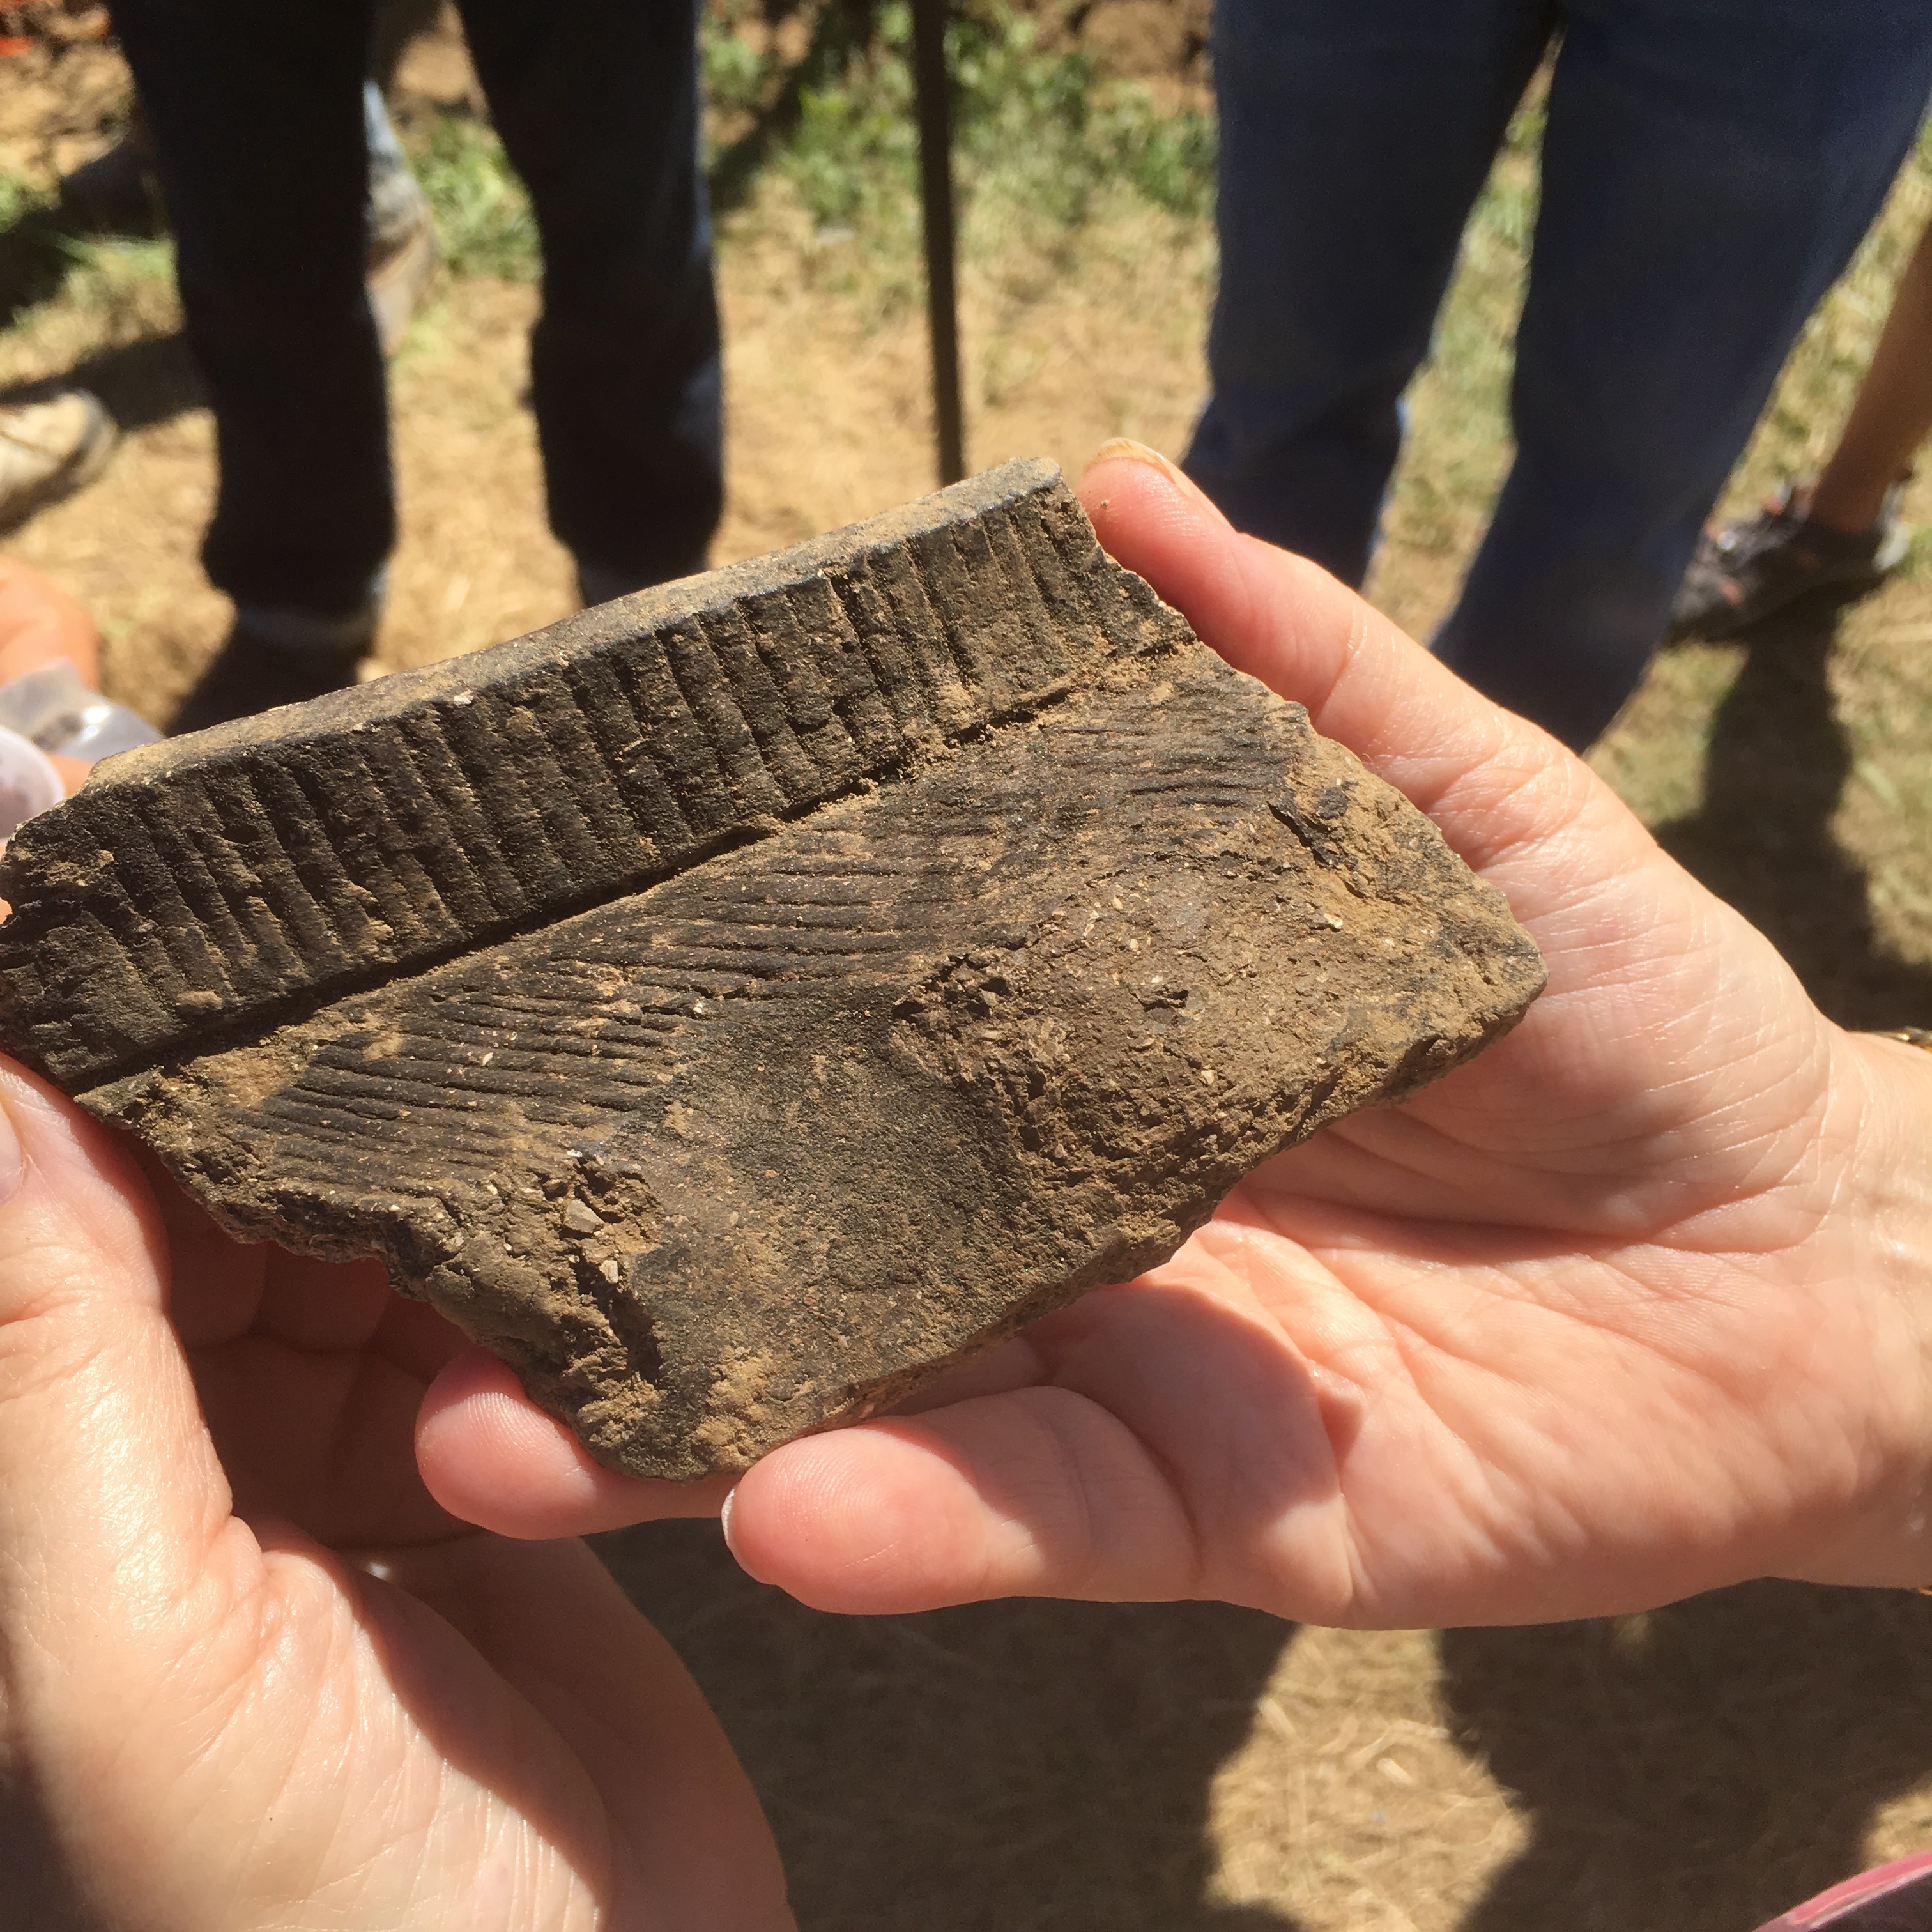 Large indigenous pottery fragment, Hollister site, 2016. photo: Walter Woodward